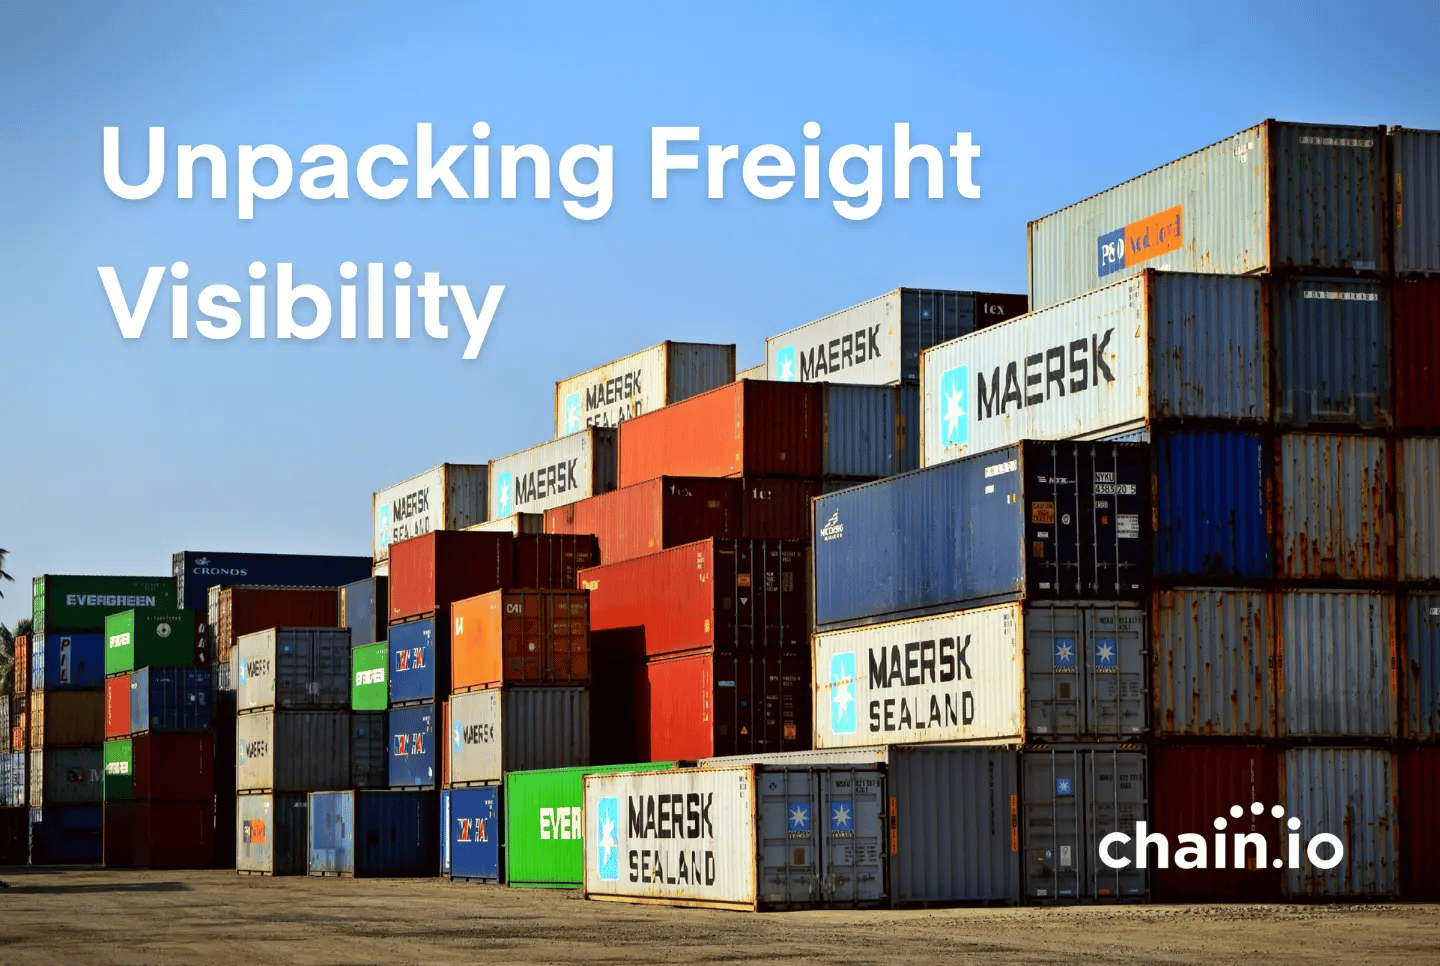 Shipping containers stacked in foreground under the text "unpacking freight visibility"